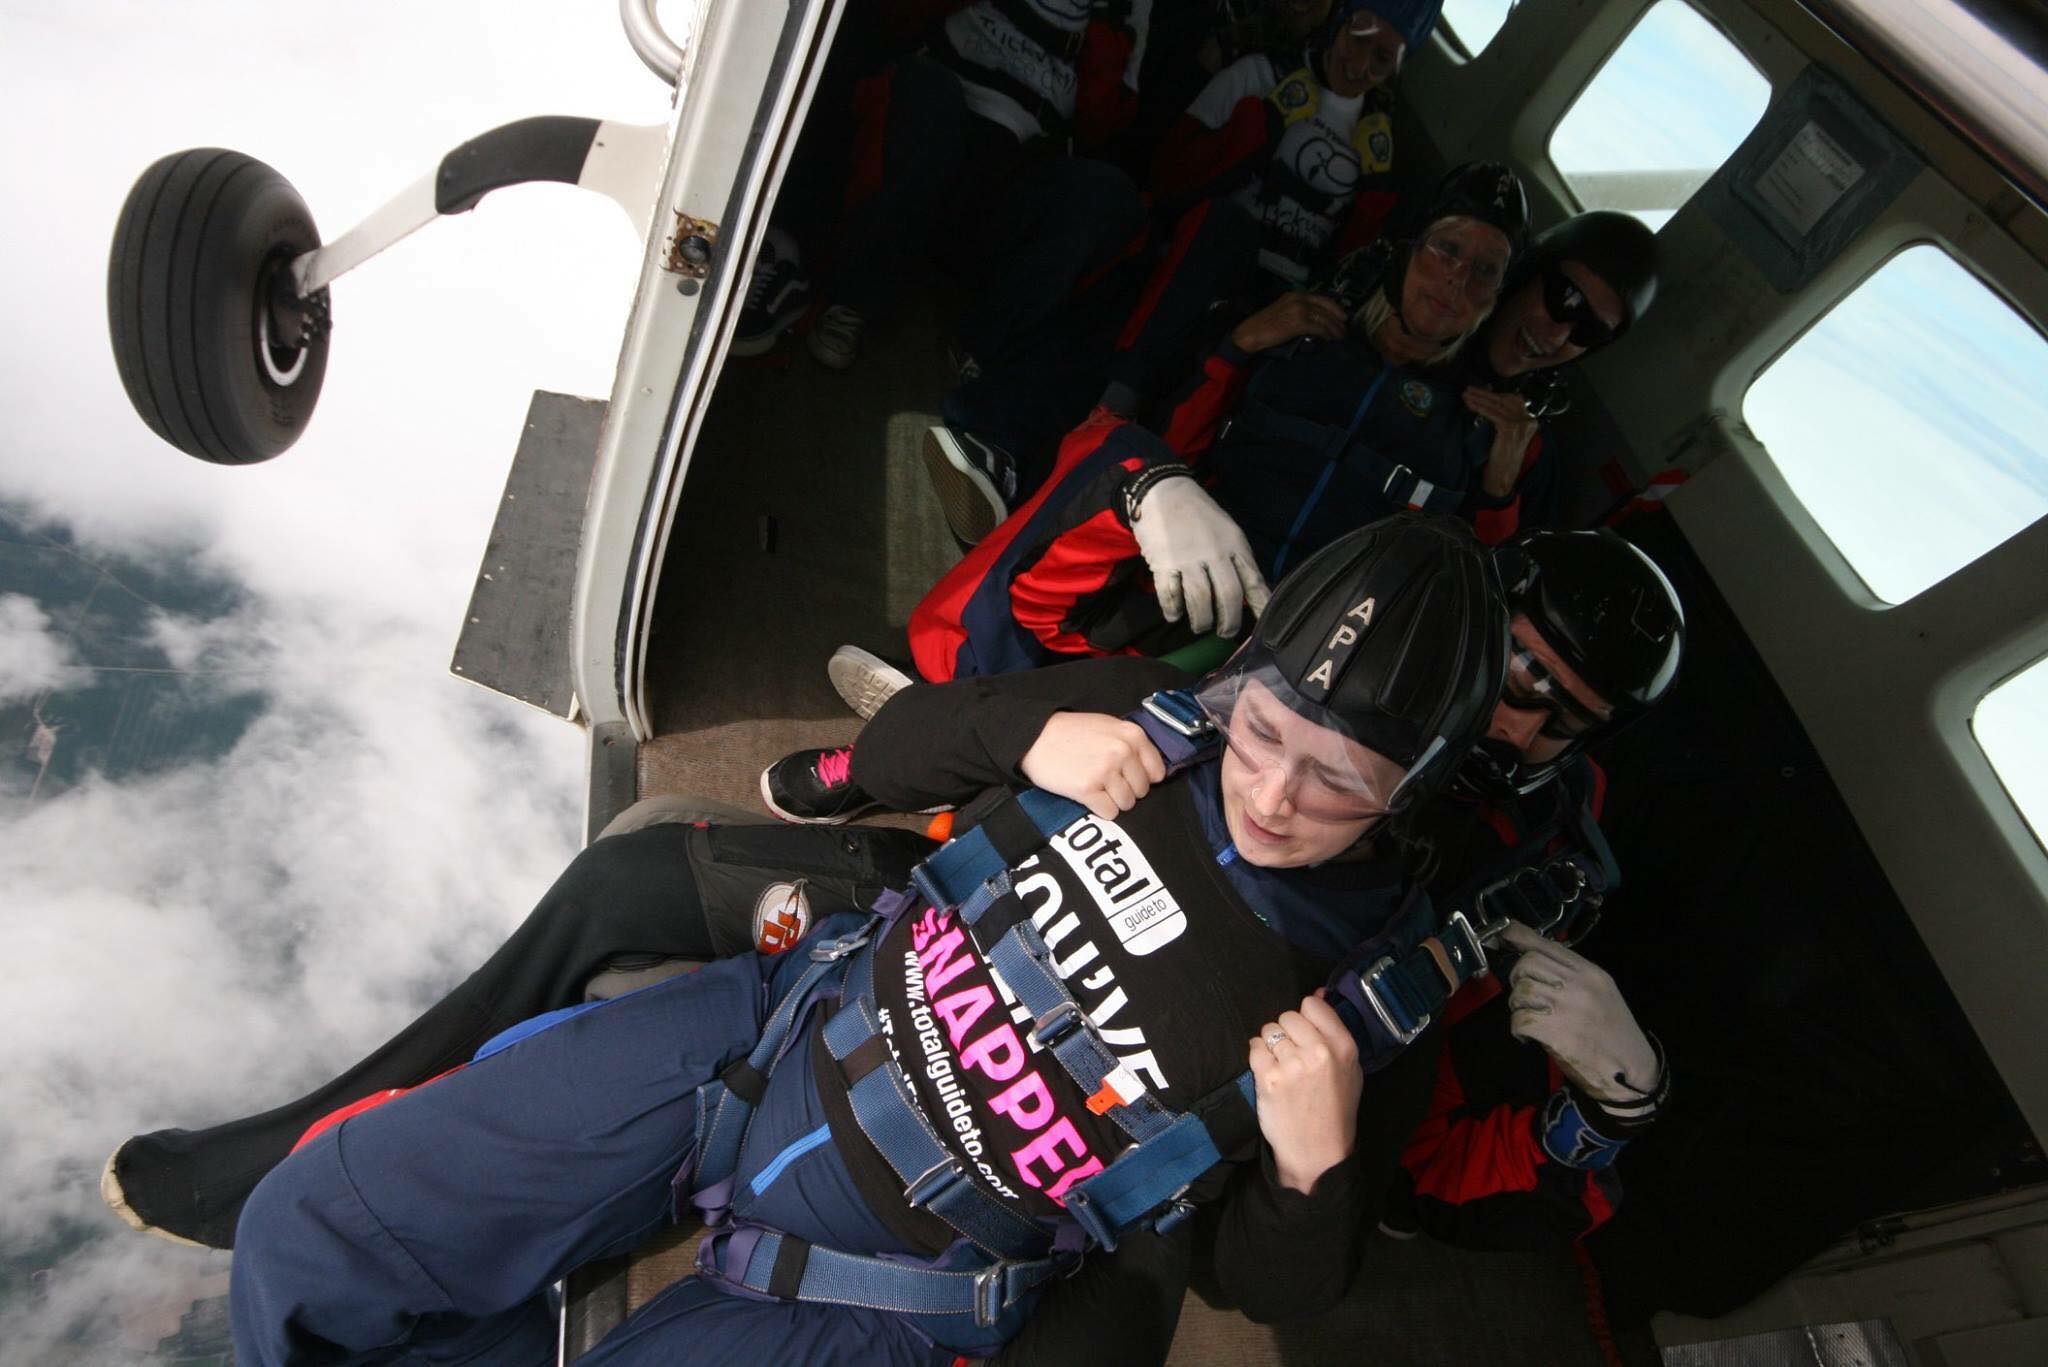 Total’s Hayley O’Connor Completes Charity Skydive for Jessie May